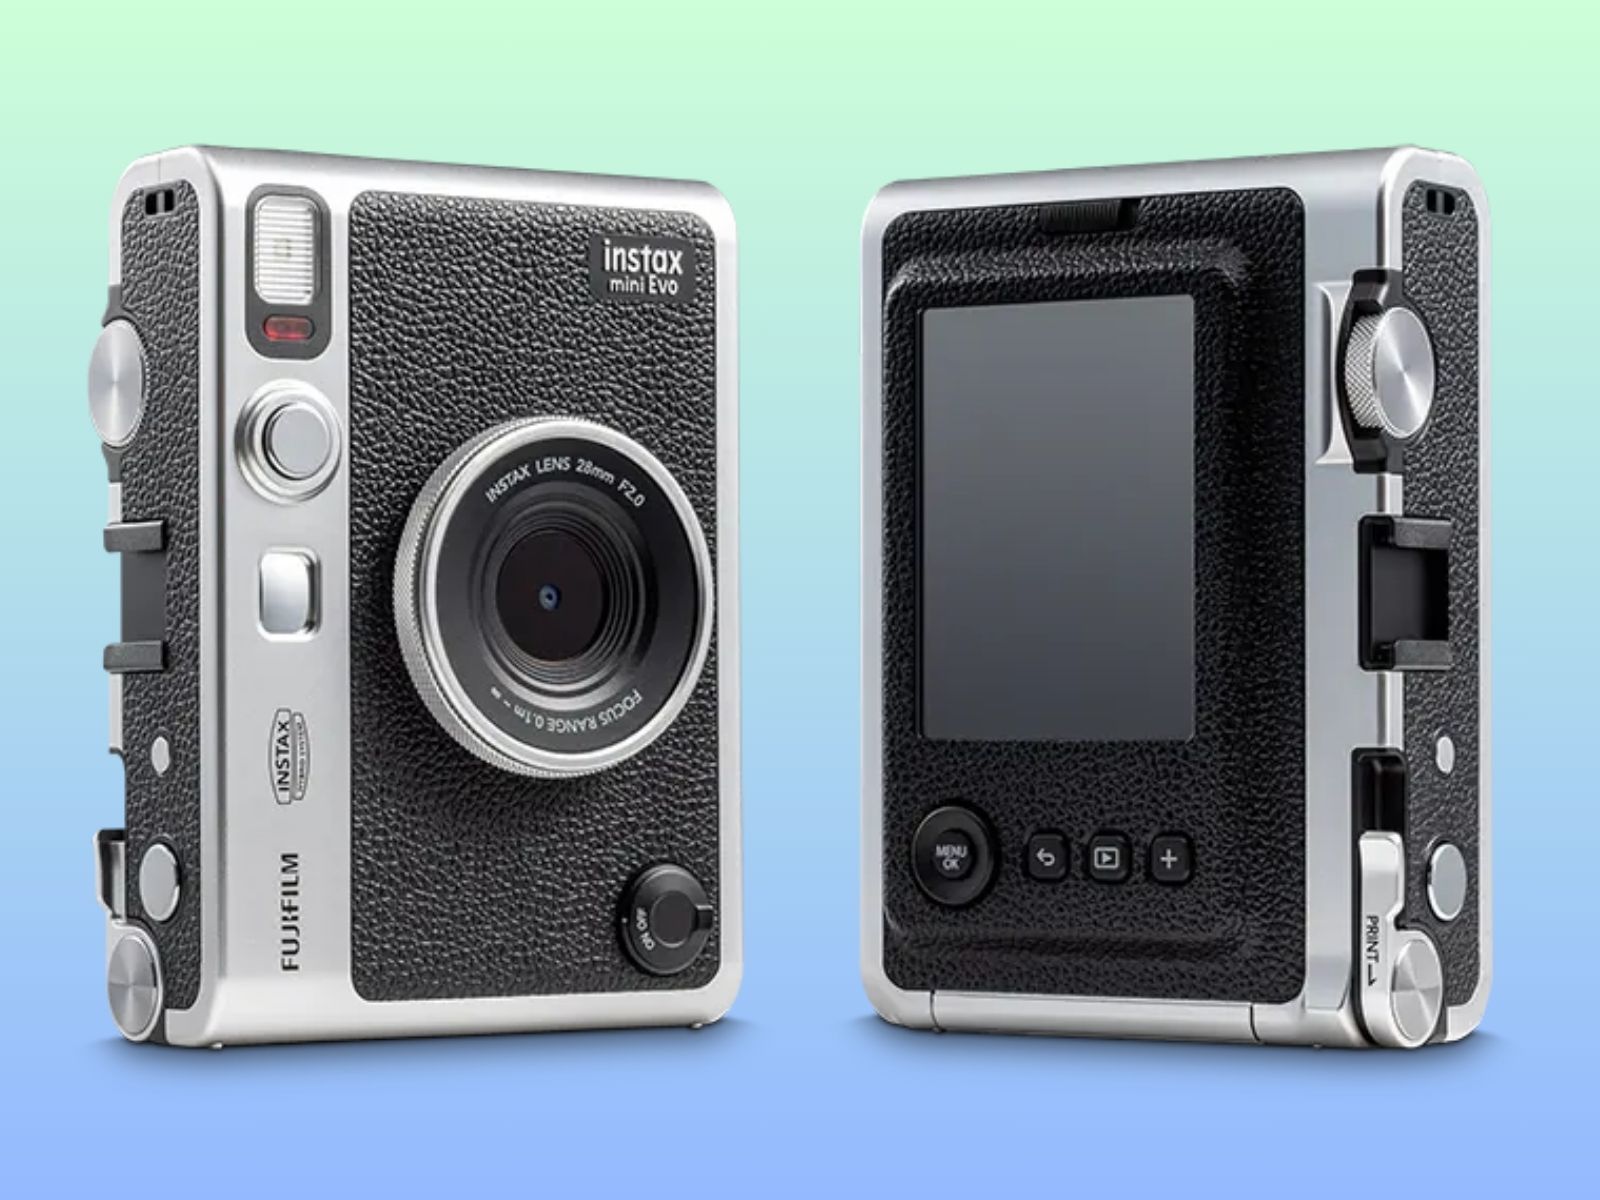 Fujifilm rumored to launch US$ Instax hybrid camera this month